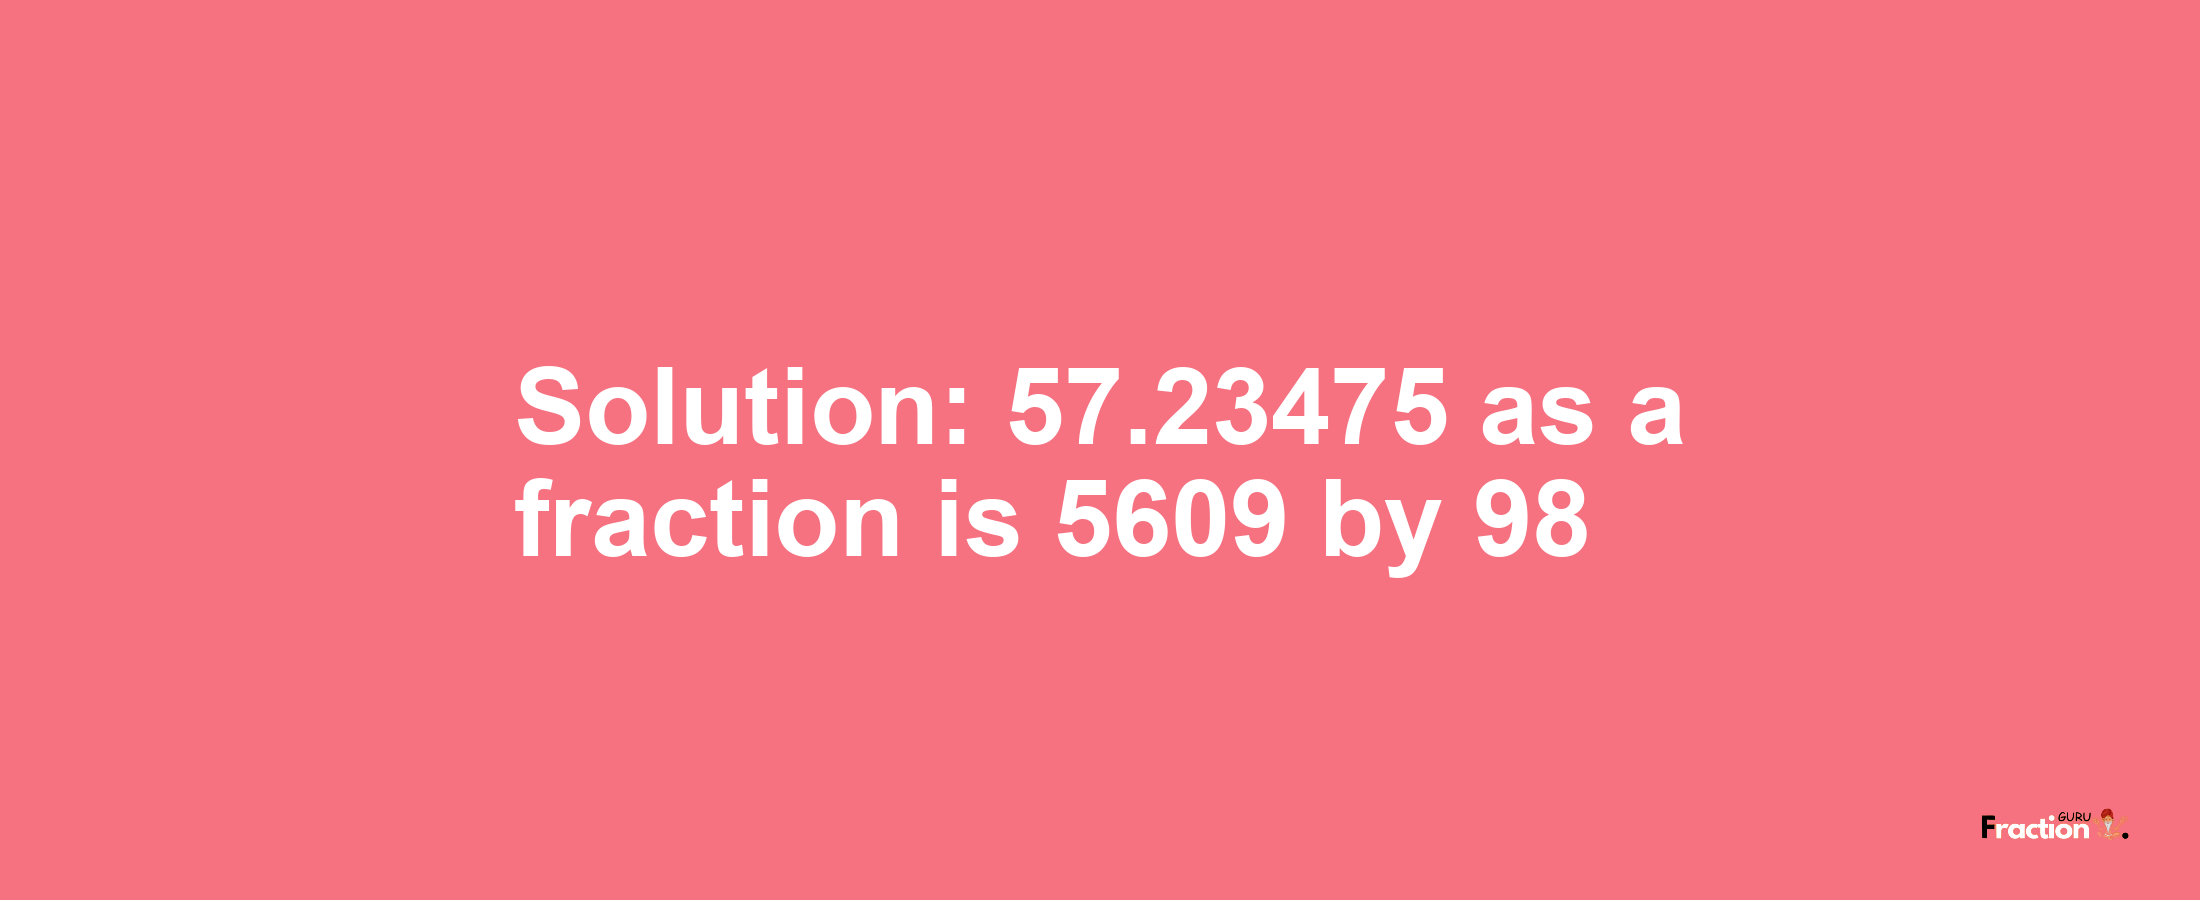 Solution:57.23475 as a fraction is 5609/98